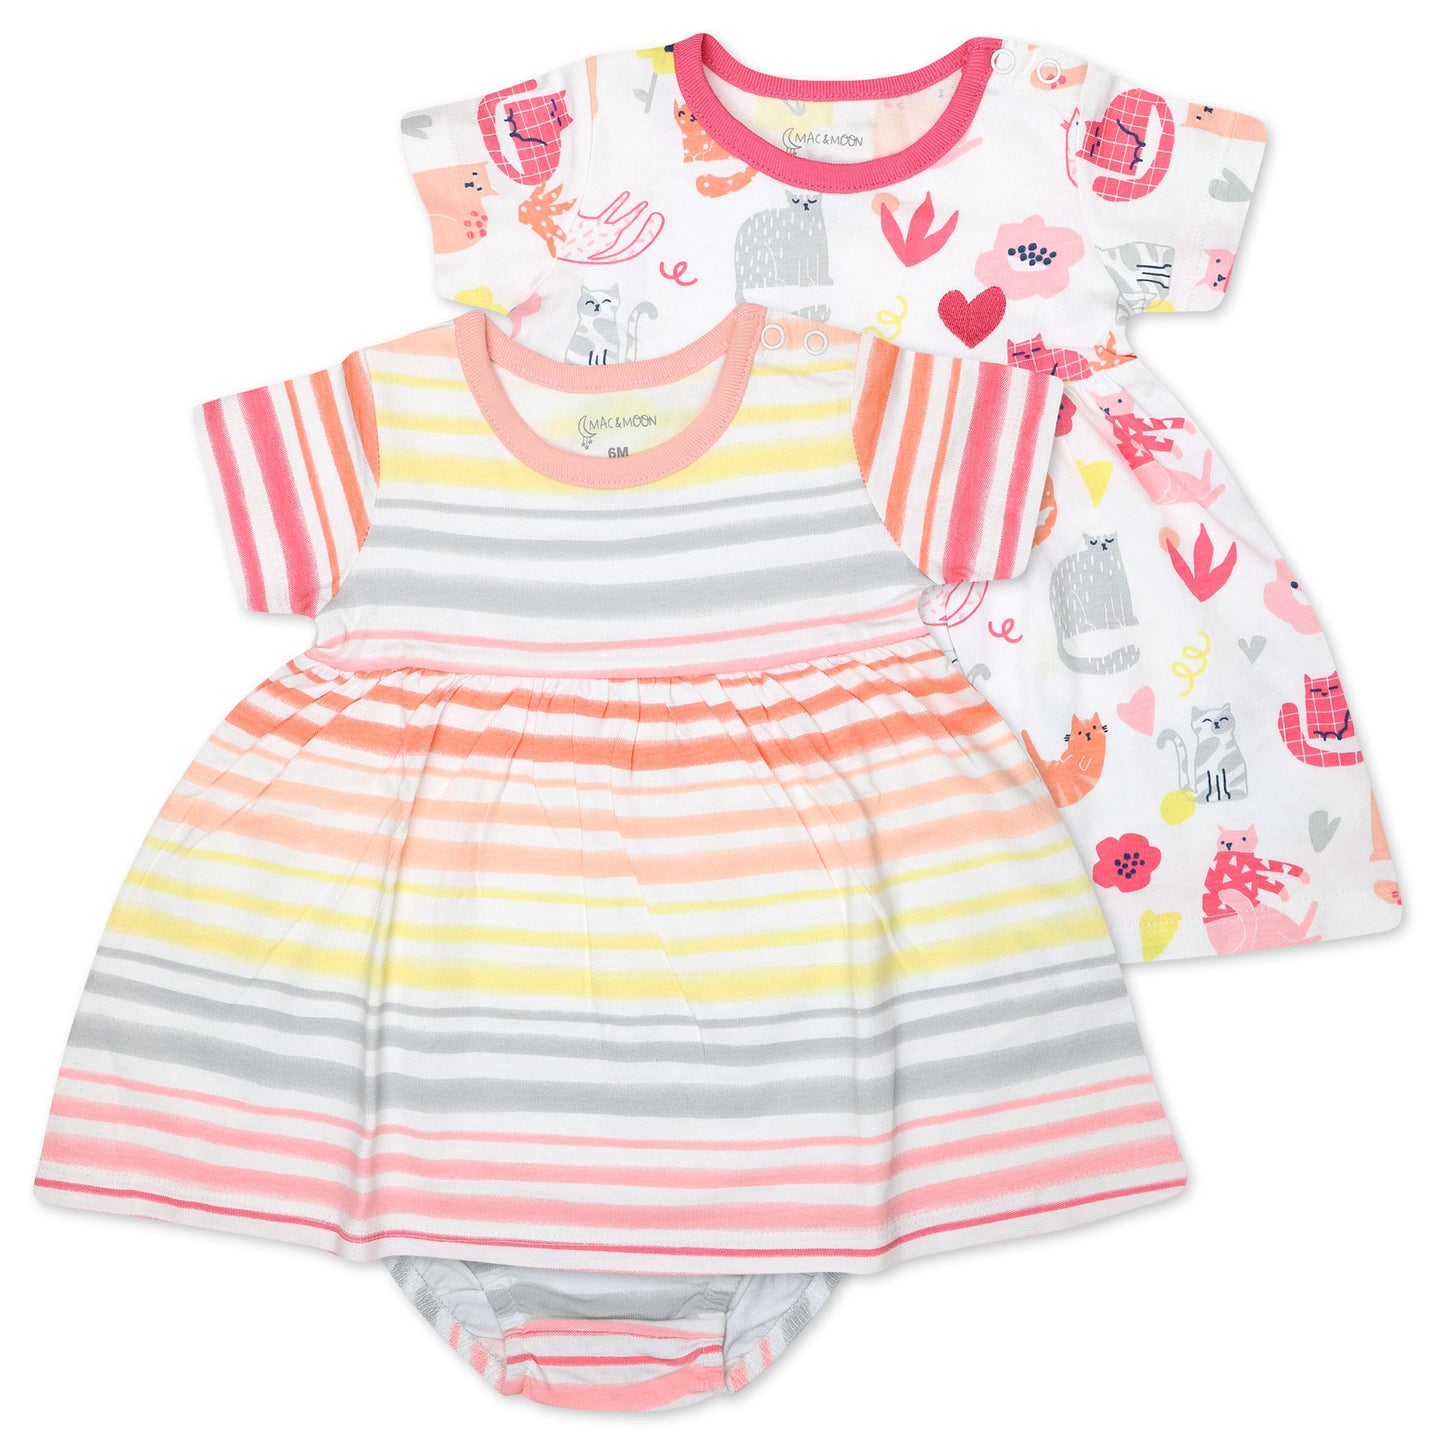 Organic Cotton 2-Pack Dress Sets in Caturday Print